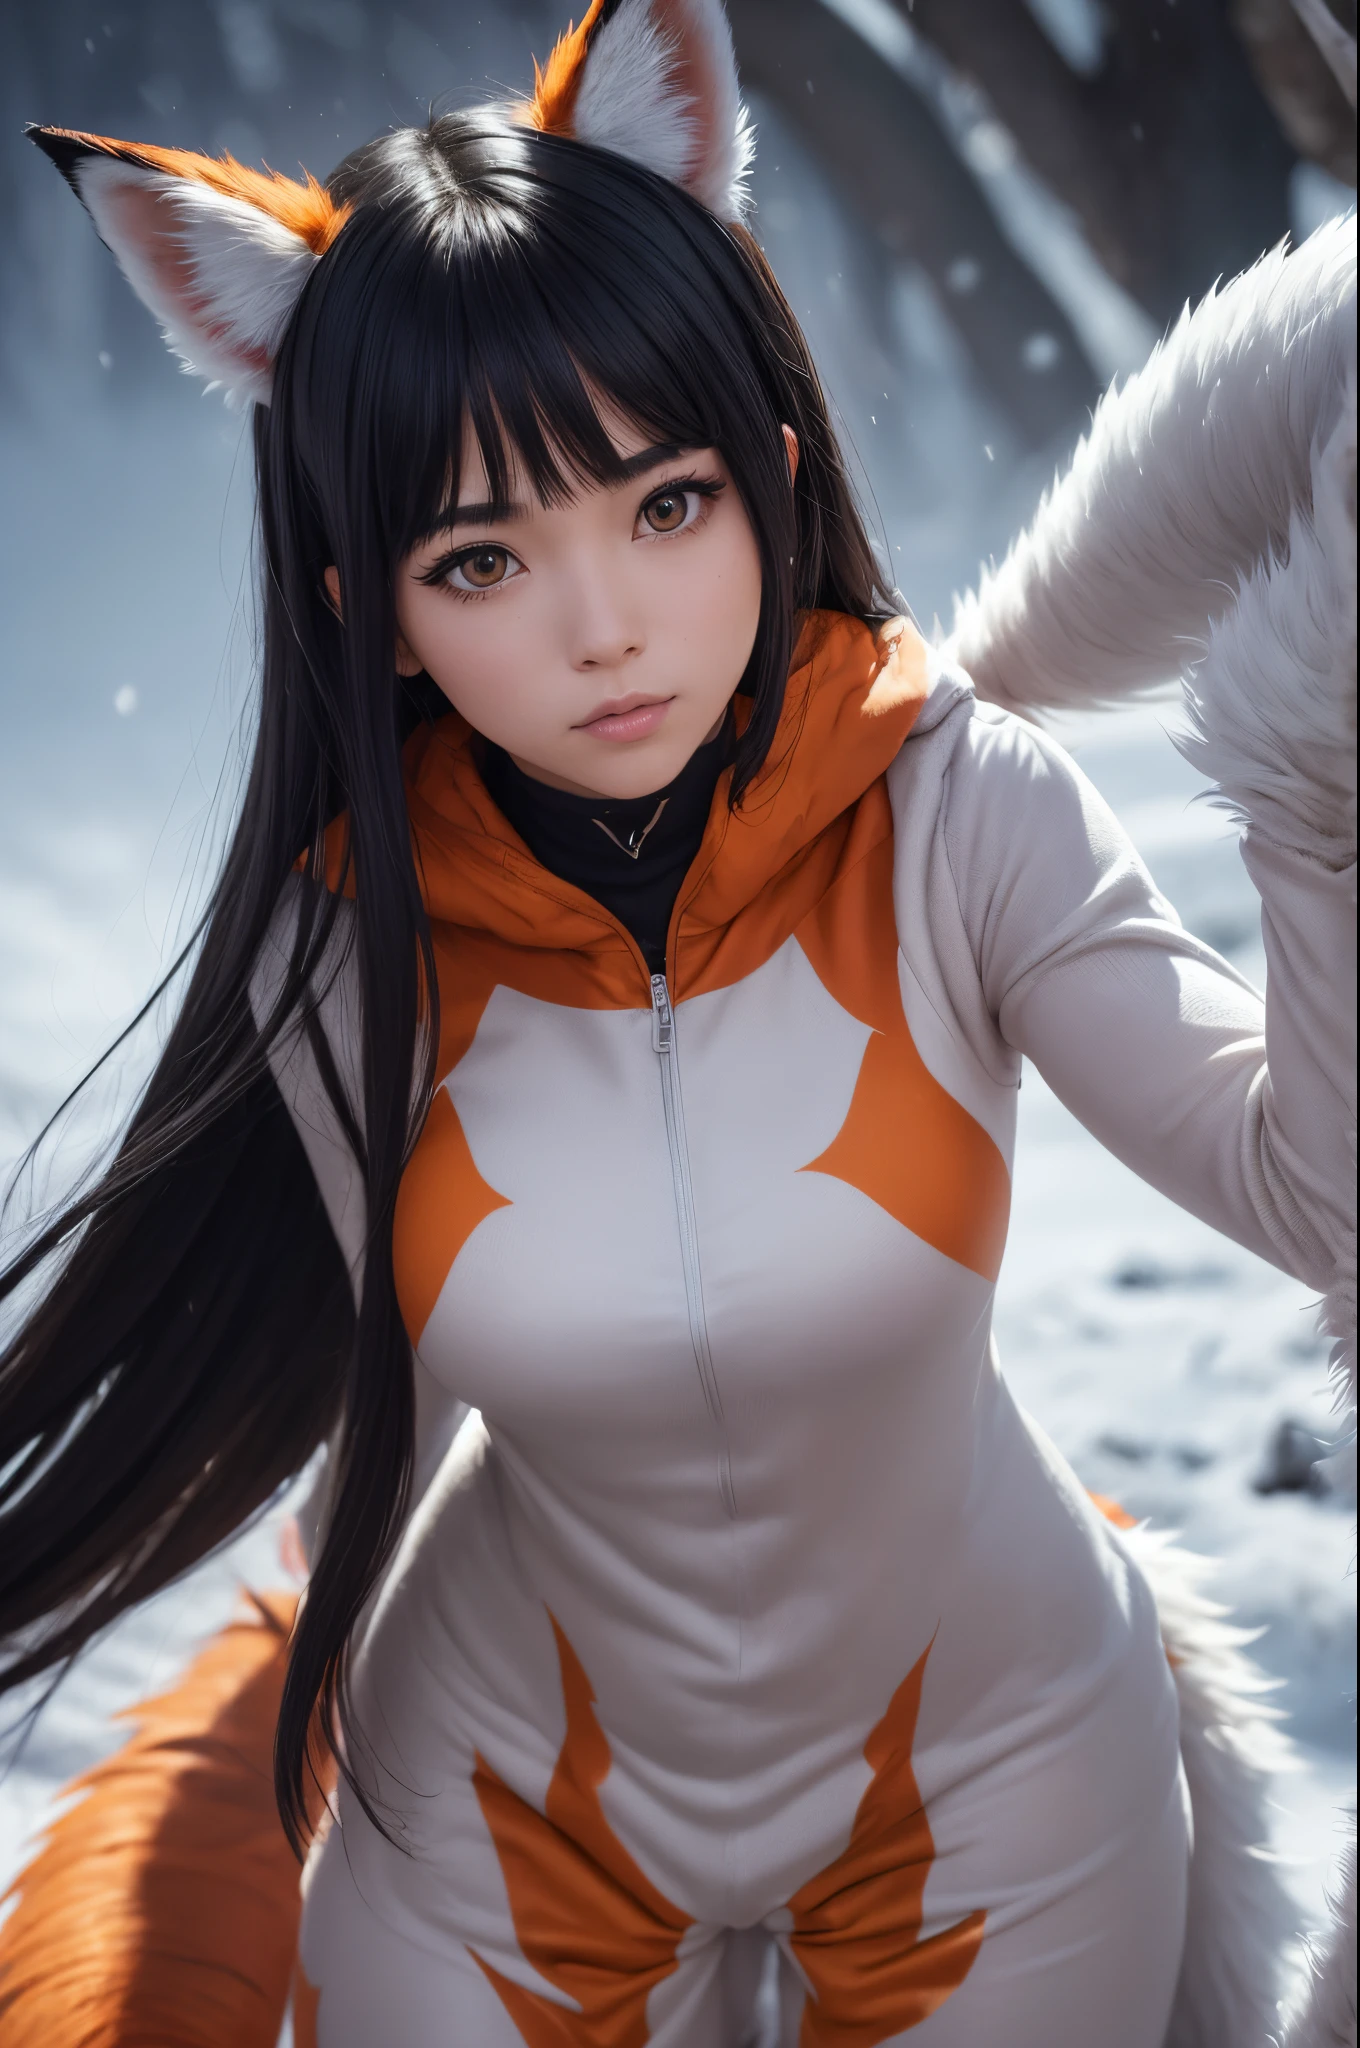 Ultra-realistic capture, Highly detailed, High resolution 16k close-up of human skin, Skin texture must be natural, Detailed enough to finely identify pores, Skin should look healthy, In a uniform tone, Use natural light and color, ahri, ahri_(lize_In the_legends), 1girl in, absurderes, animal_Ears, Black_hair, Detached_sleeves, Distri, facial arcs, Fox_Ears, Fox_tail, Hand_ ass hole up, hight resolution, lize_In the_legends, long_hair, Snow Suit, Magic, multiple_tailed, white_tailed, orange_Eyes, parted_Lips, Solo, Standing, tail, full_Body, arms behind back, appearance々Let&#39;s take Japanese monsters with us, ((Wearing a demon fox costume)), ((In a pose where you attack with both hands))